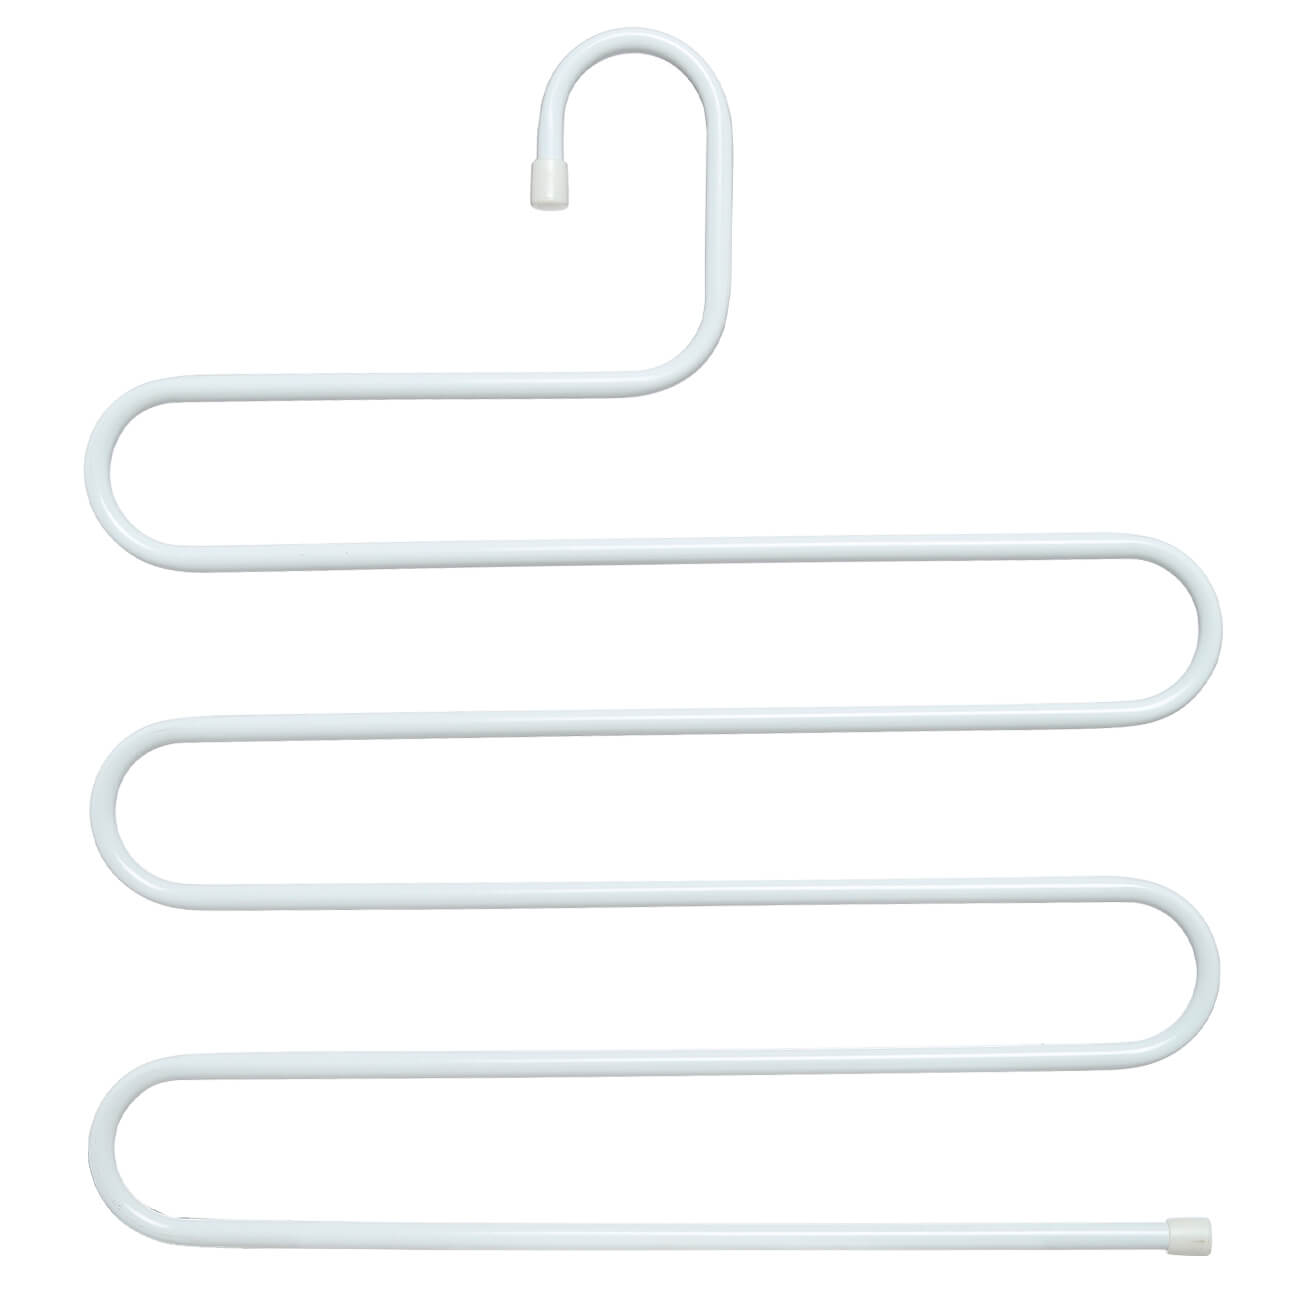 Hanger for trousers/skirts, 36 cm, 5 levels, metal, white, Colorful house изображение № 1